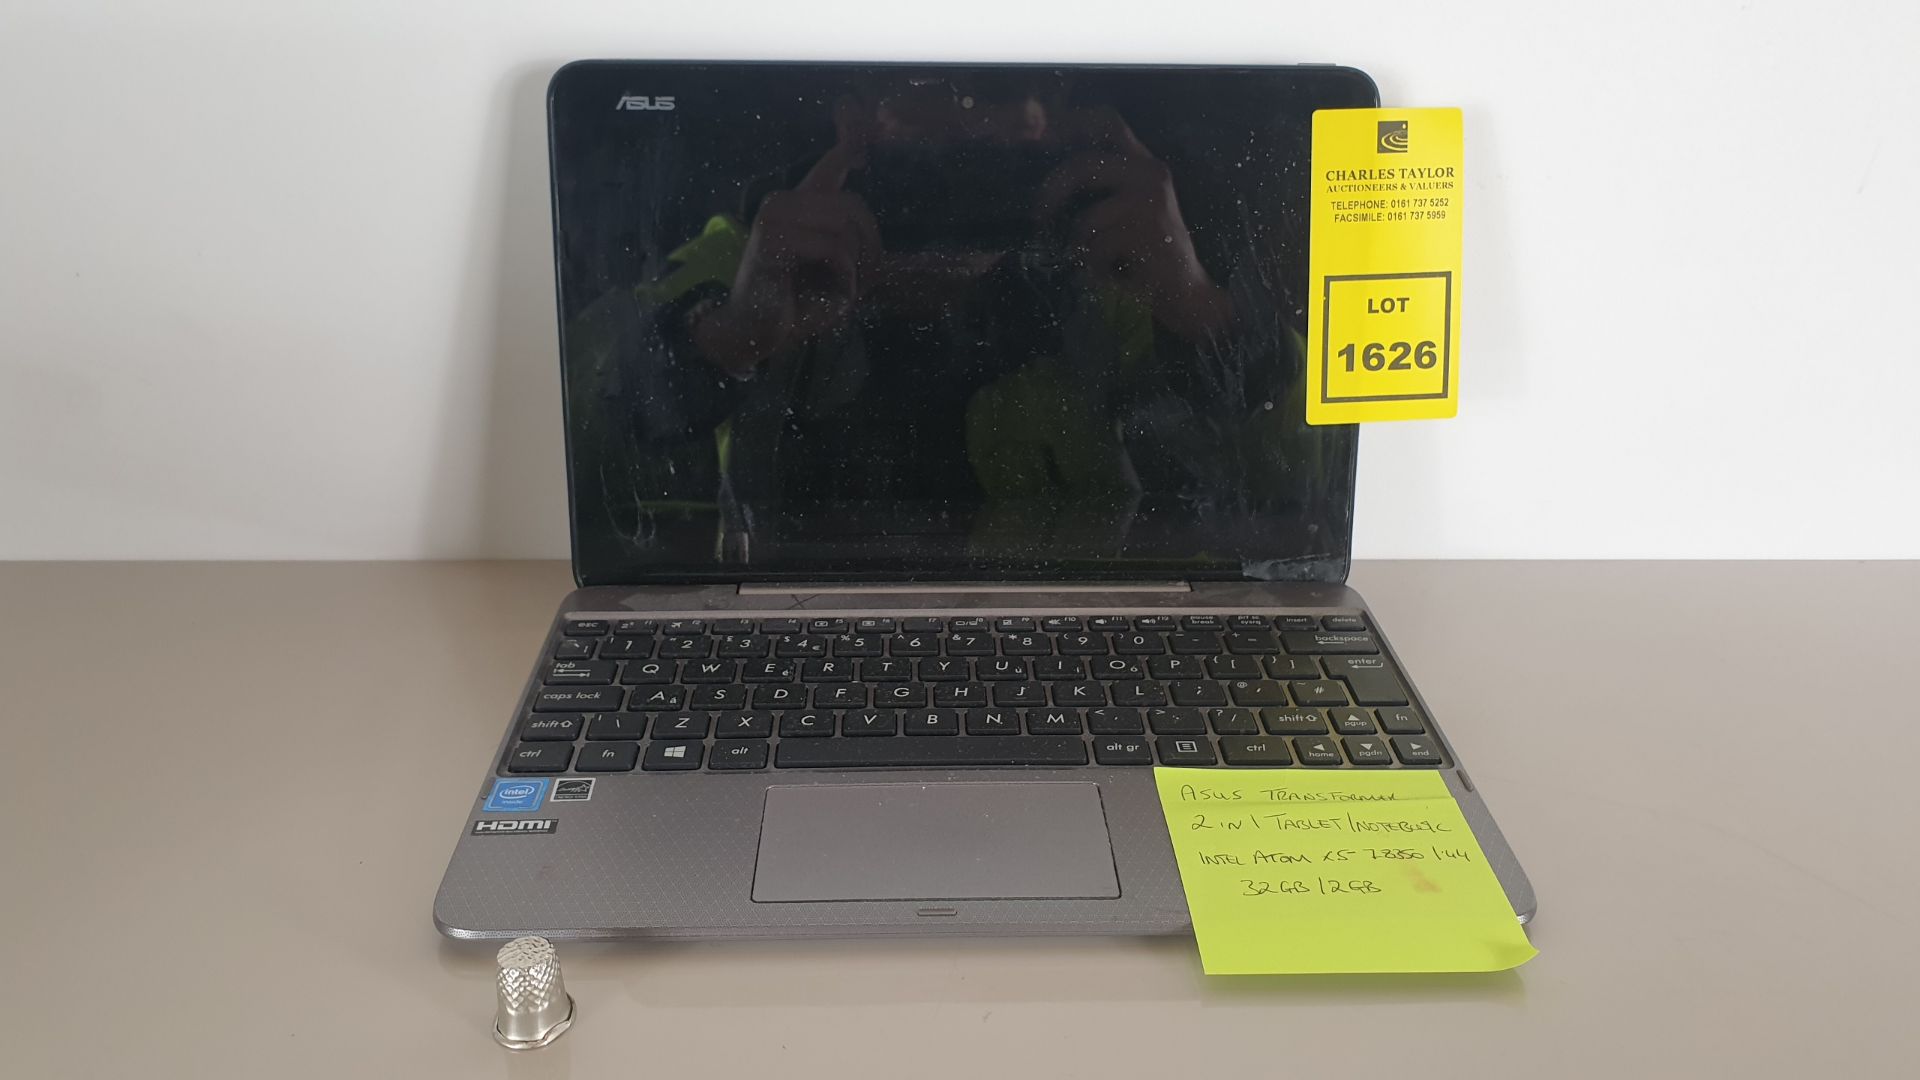 (LOT FOR THURSDAY 28TH MAY AUCTION) ASUS TRANSFORMER 2 IN 1 TABLET / NOTEBOOK - INTEL ATOM X5